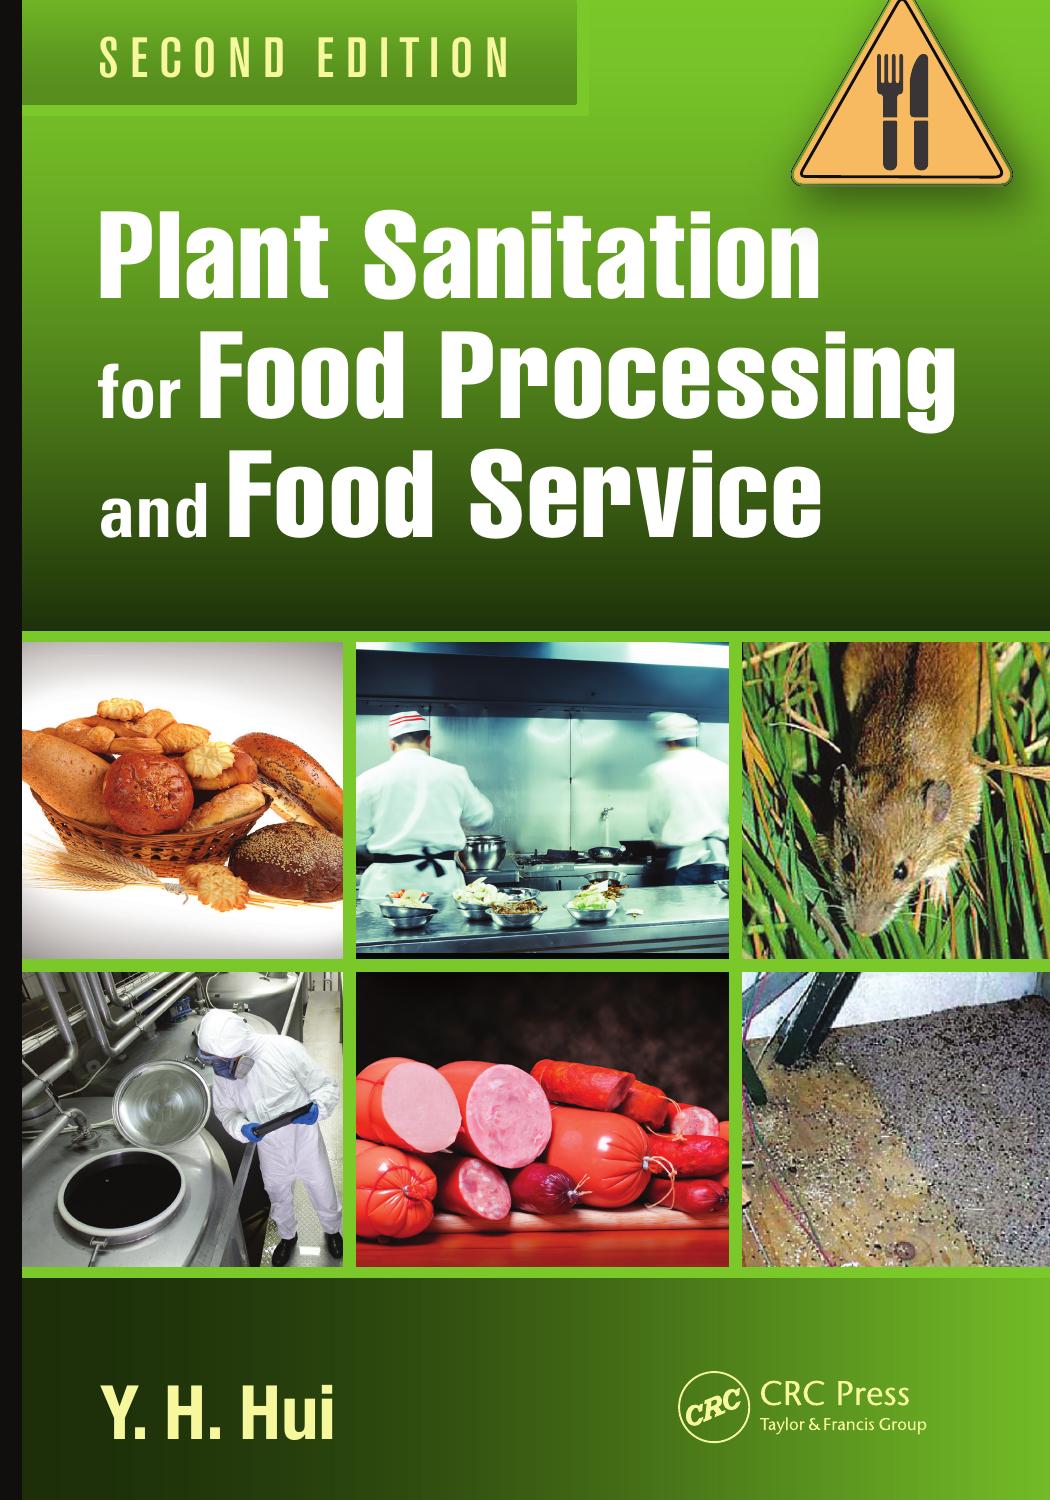 Plant Sanitation for Food Processing and Food Service, Second Edition